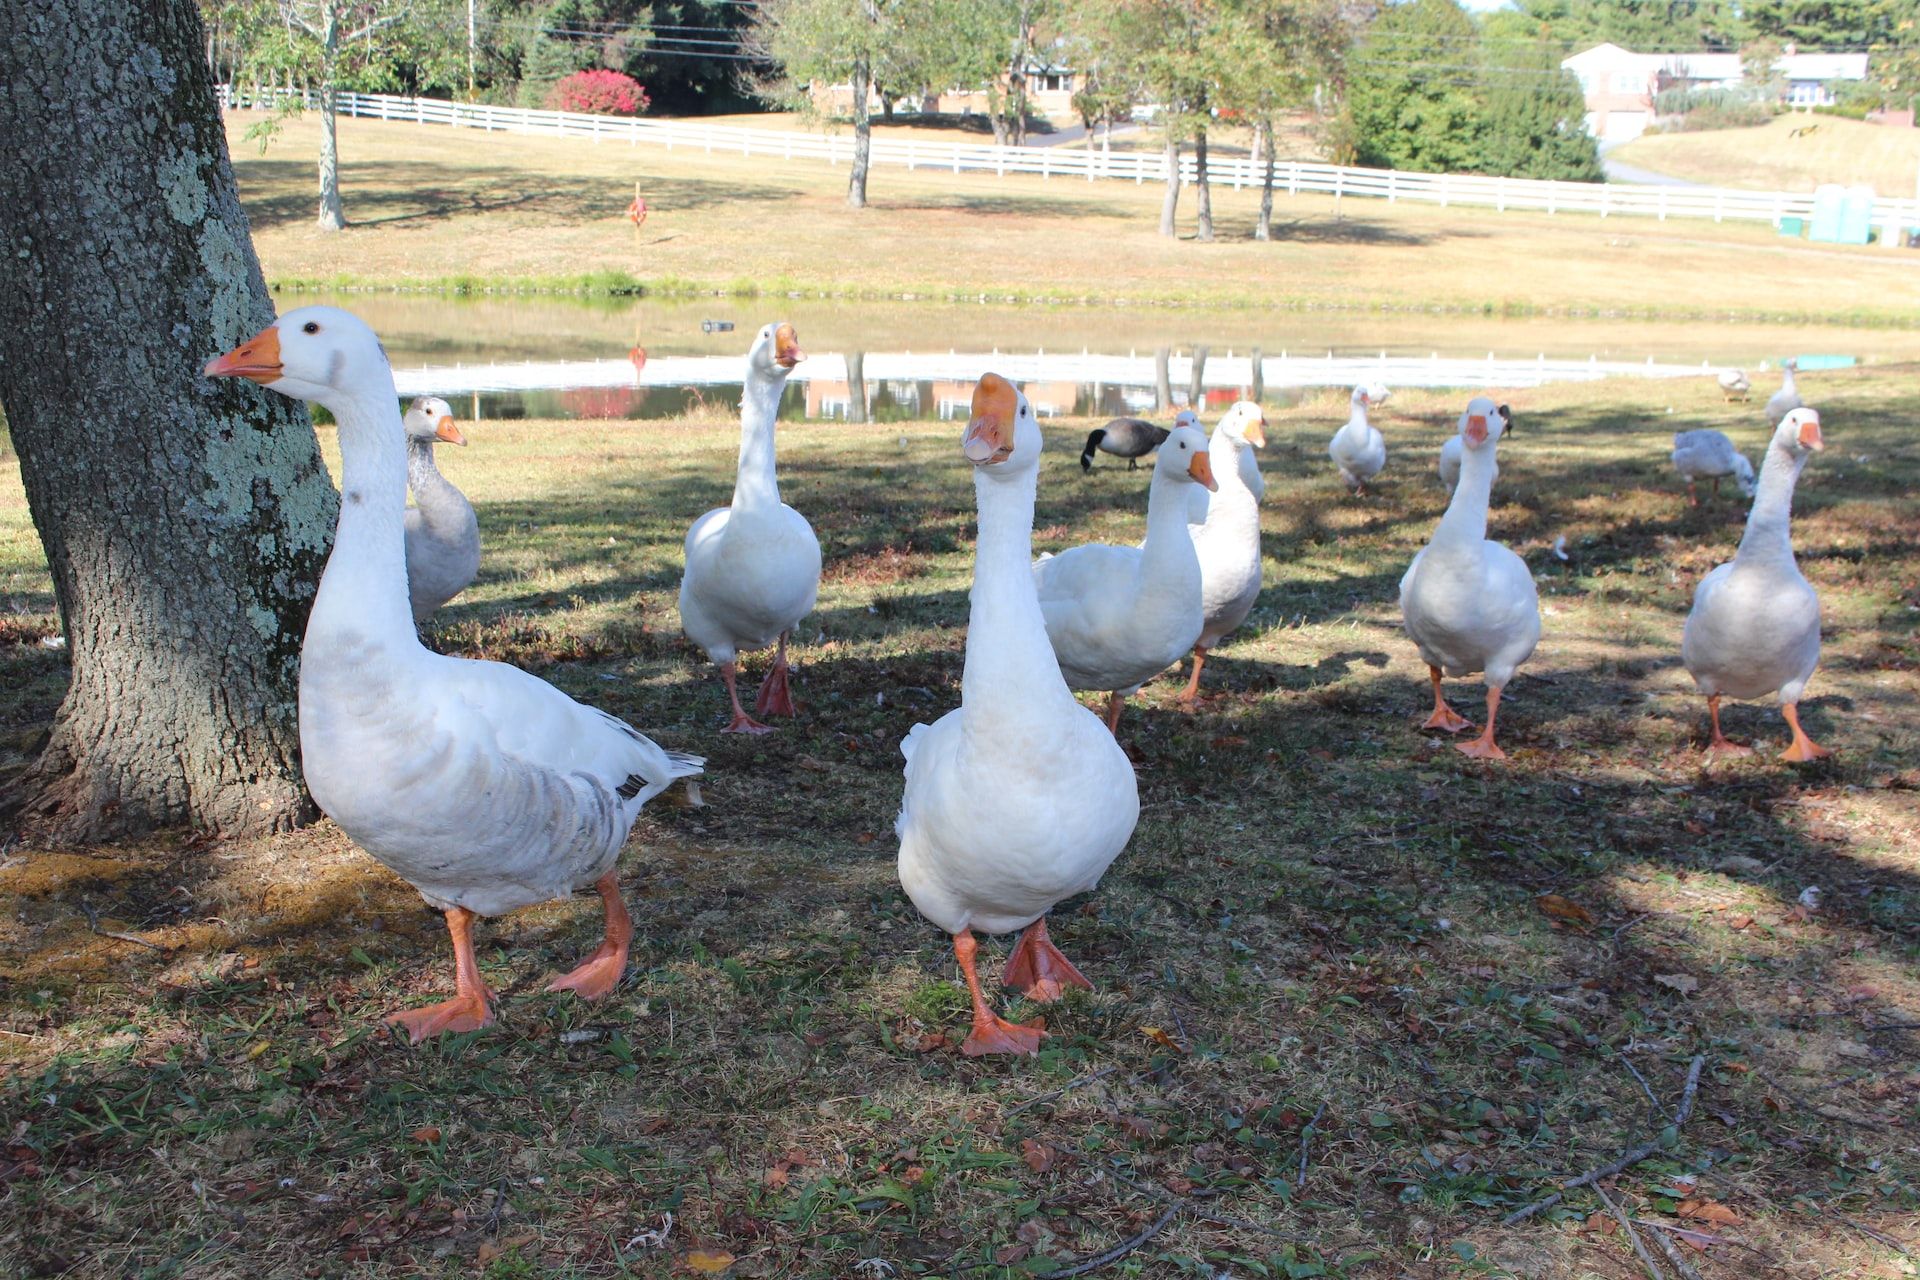 Geese roaming around the sprawling property of Carousel Park.